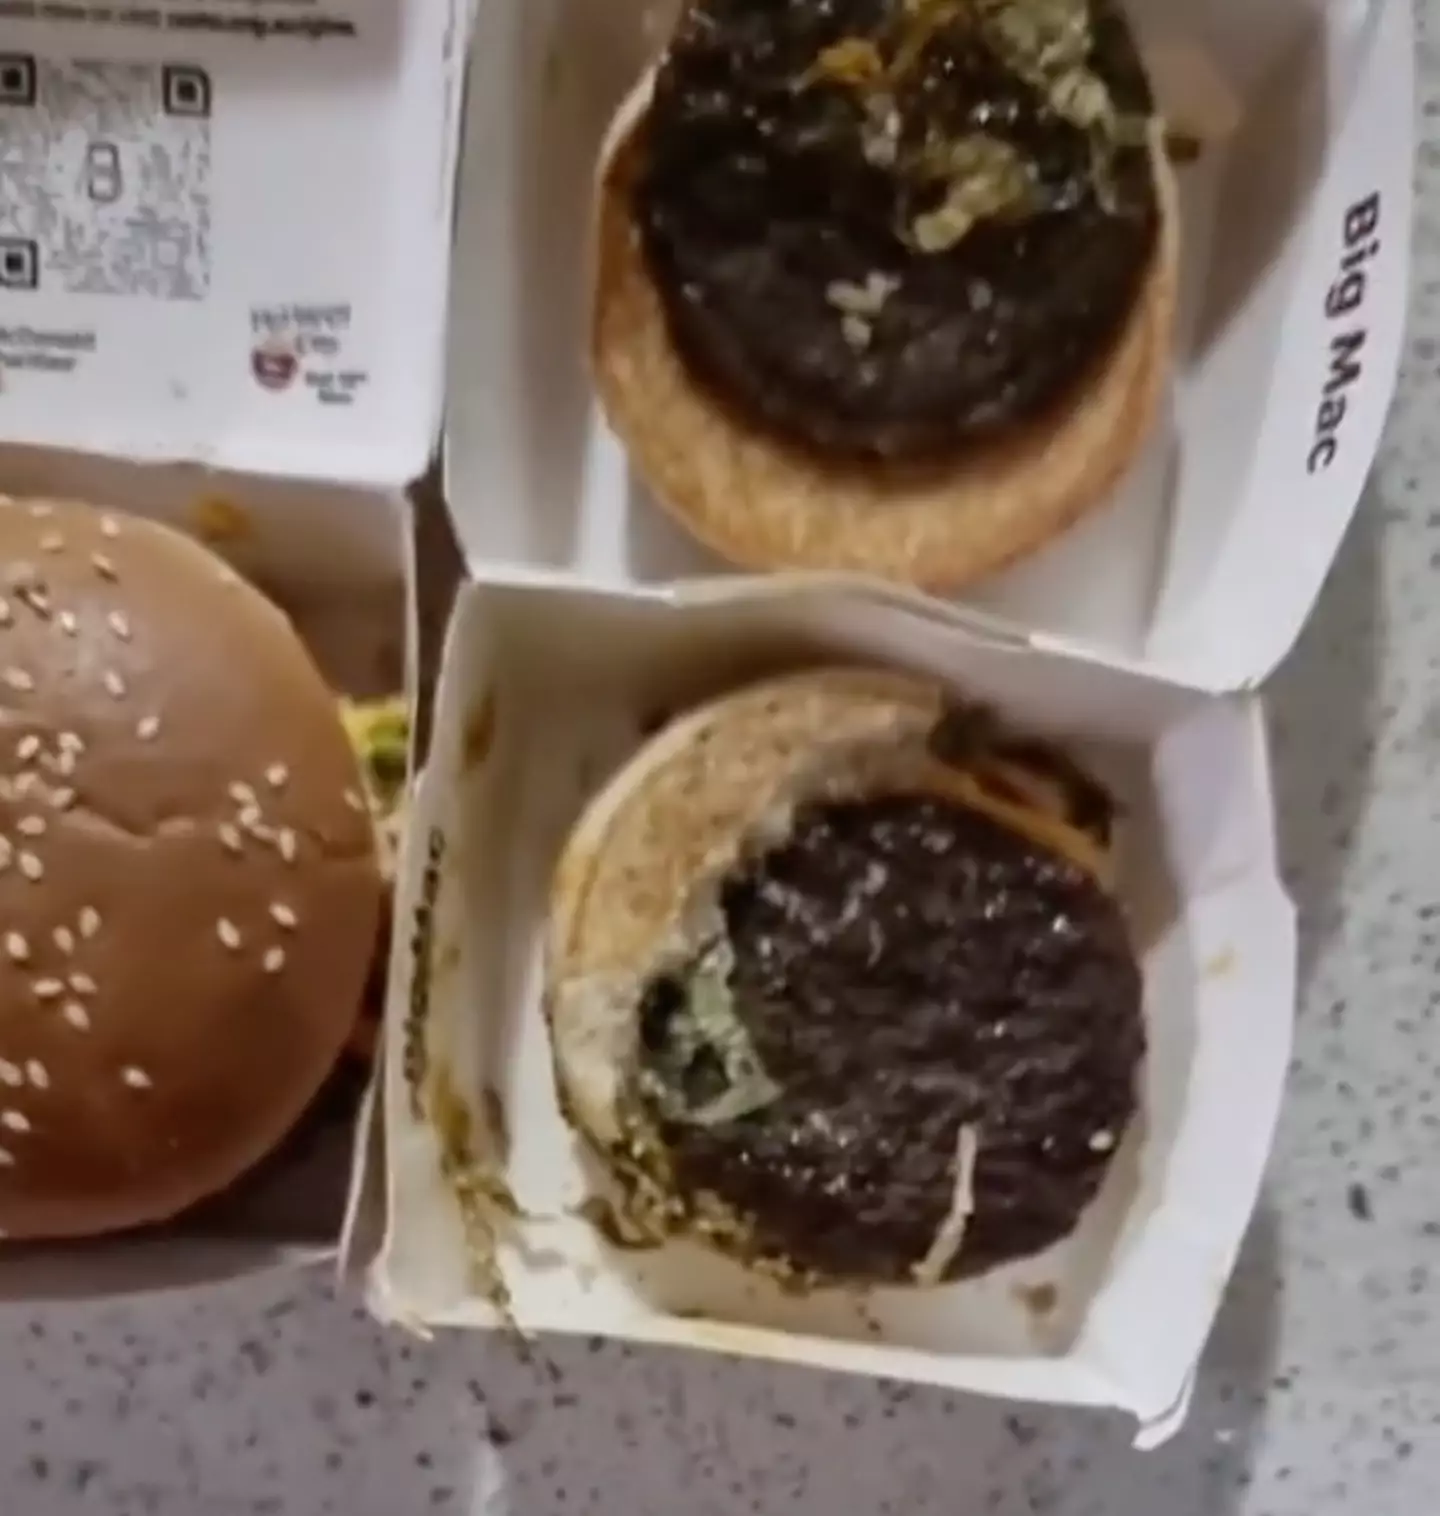 The three-month-old burger didn't have any 'mould' or 'rot' on it.